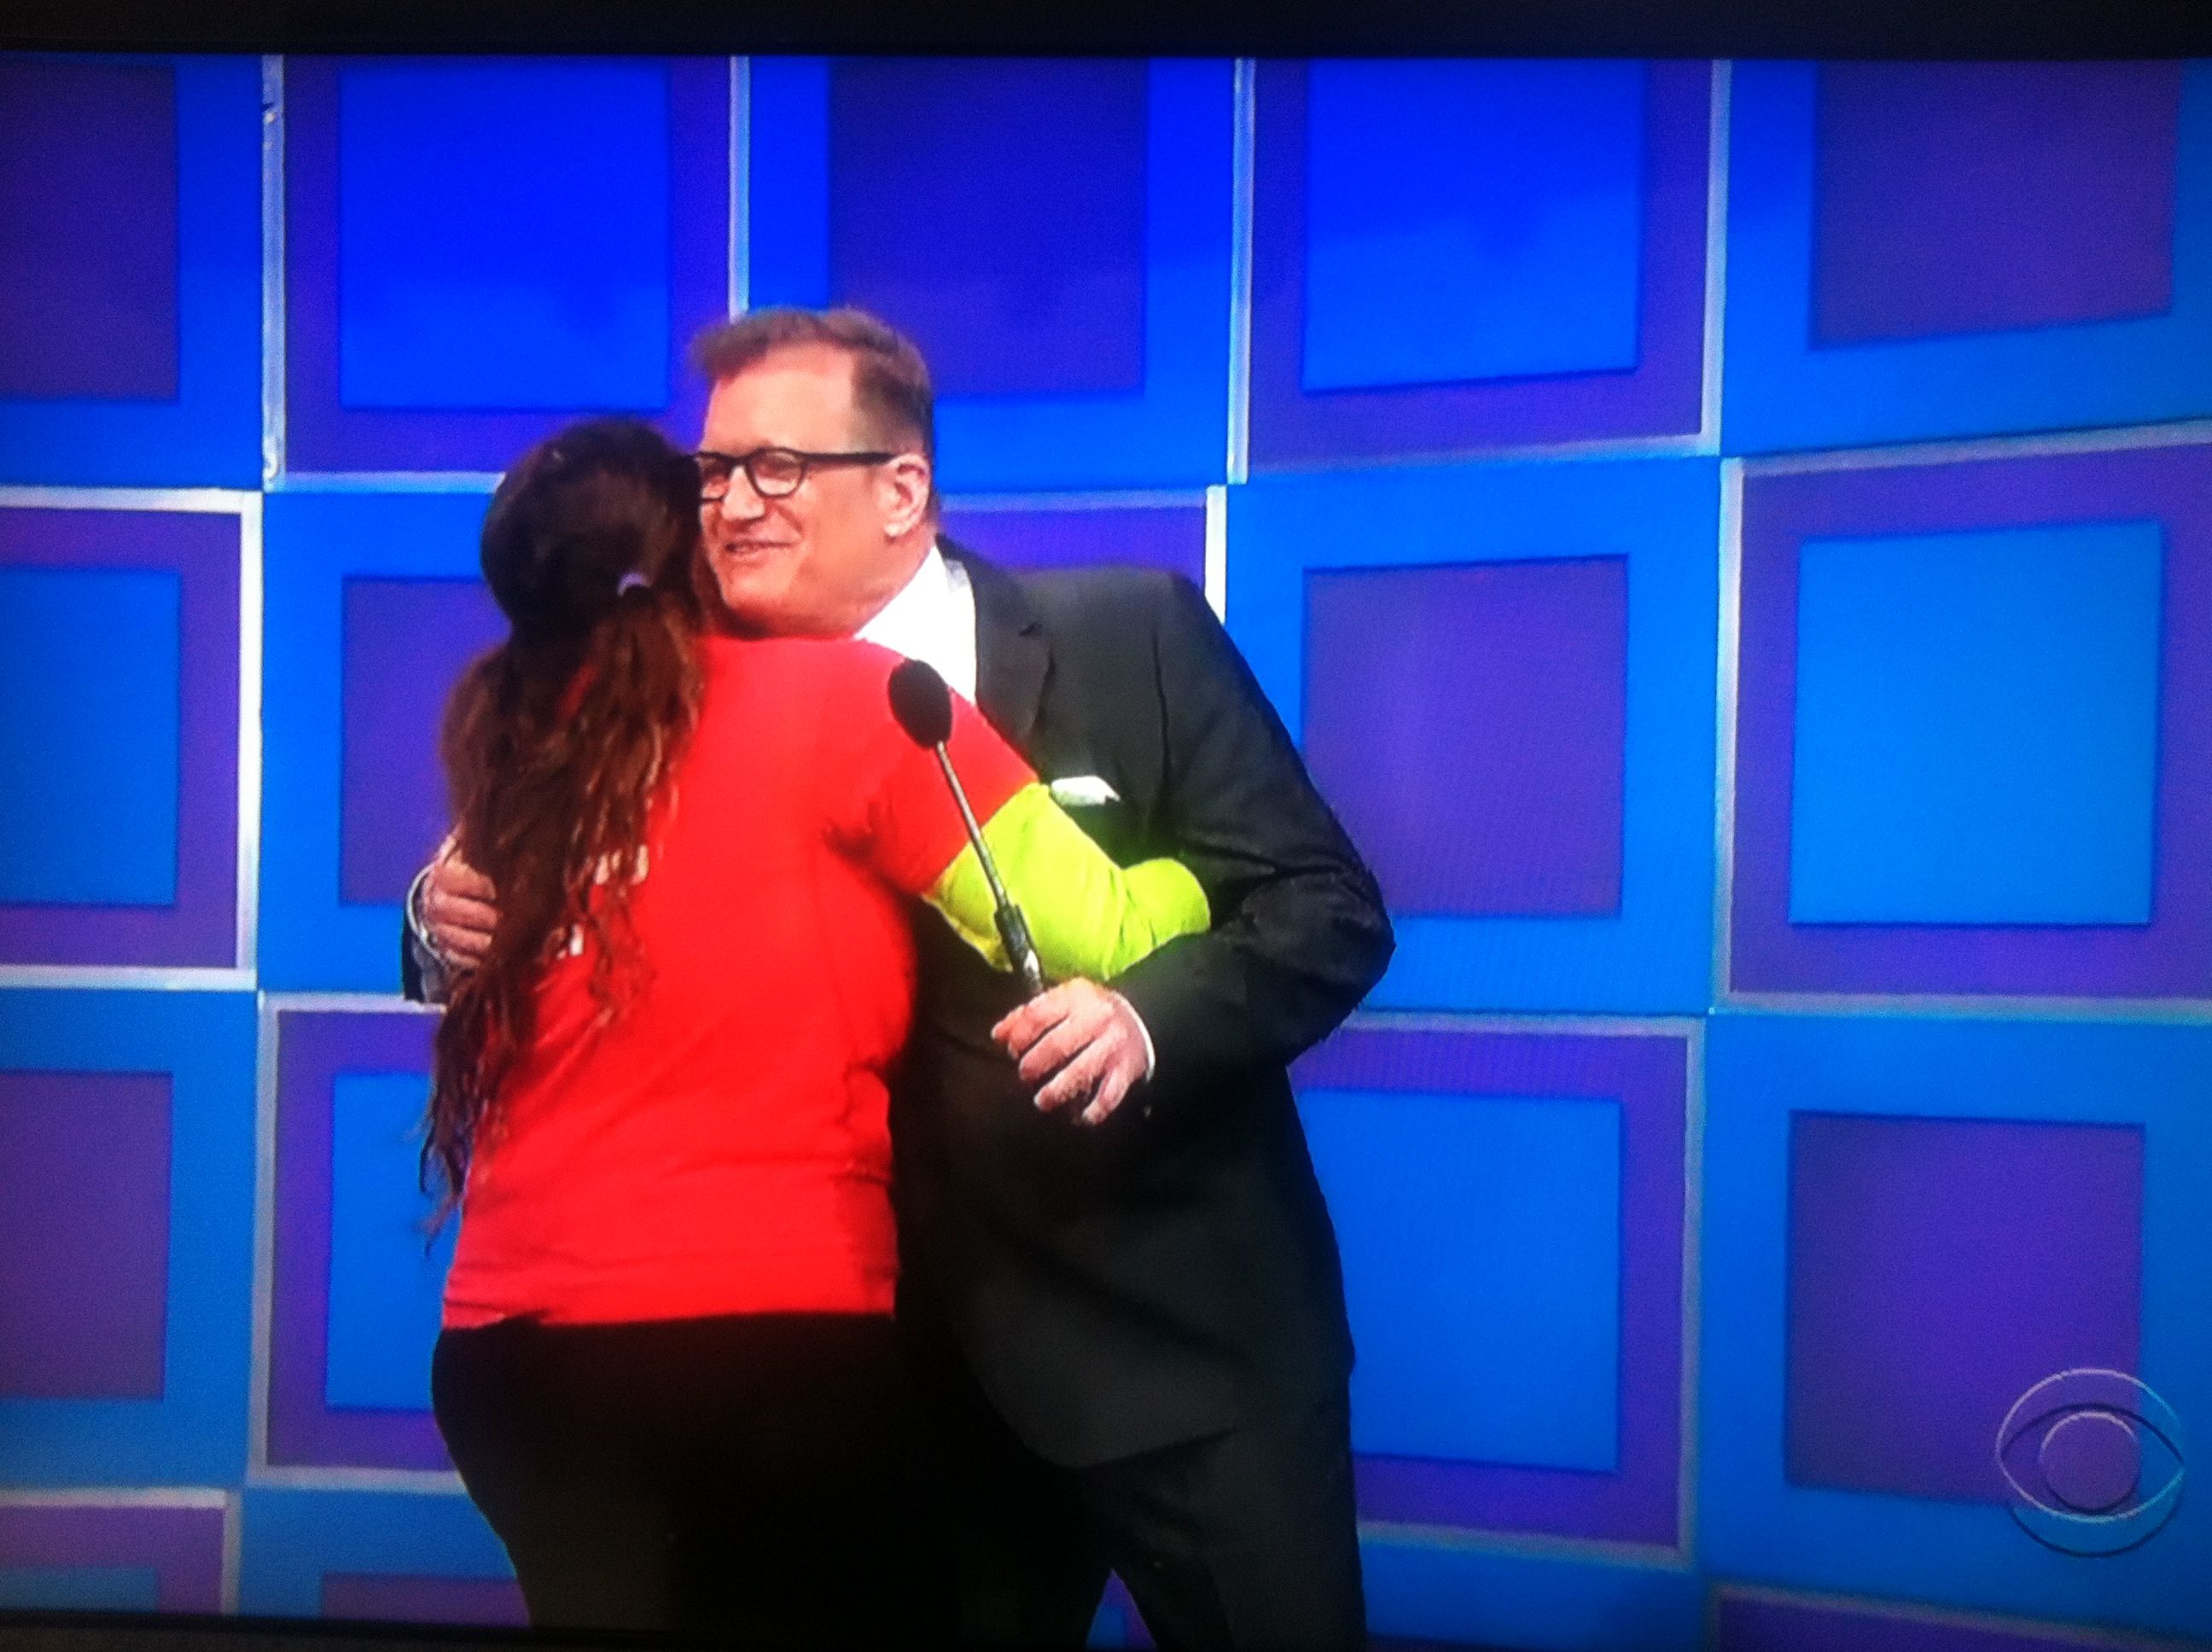 Aurora De Lucia hugging Drew Carey on The Price is Right stage